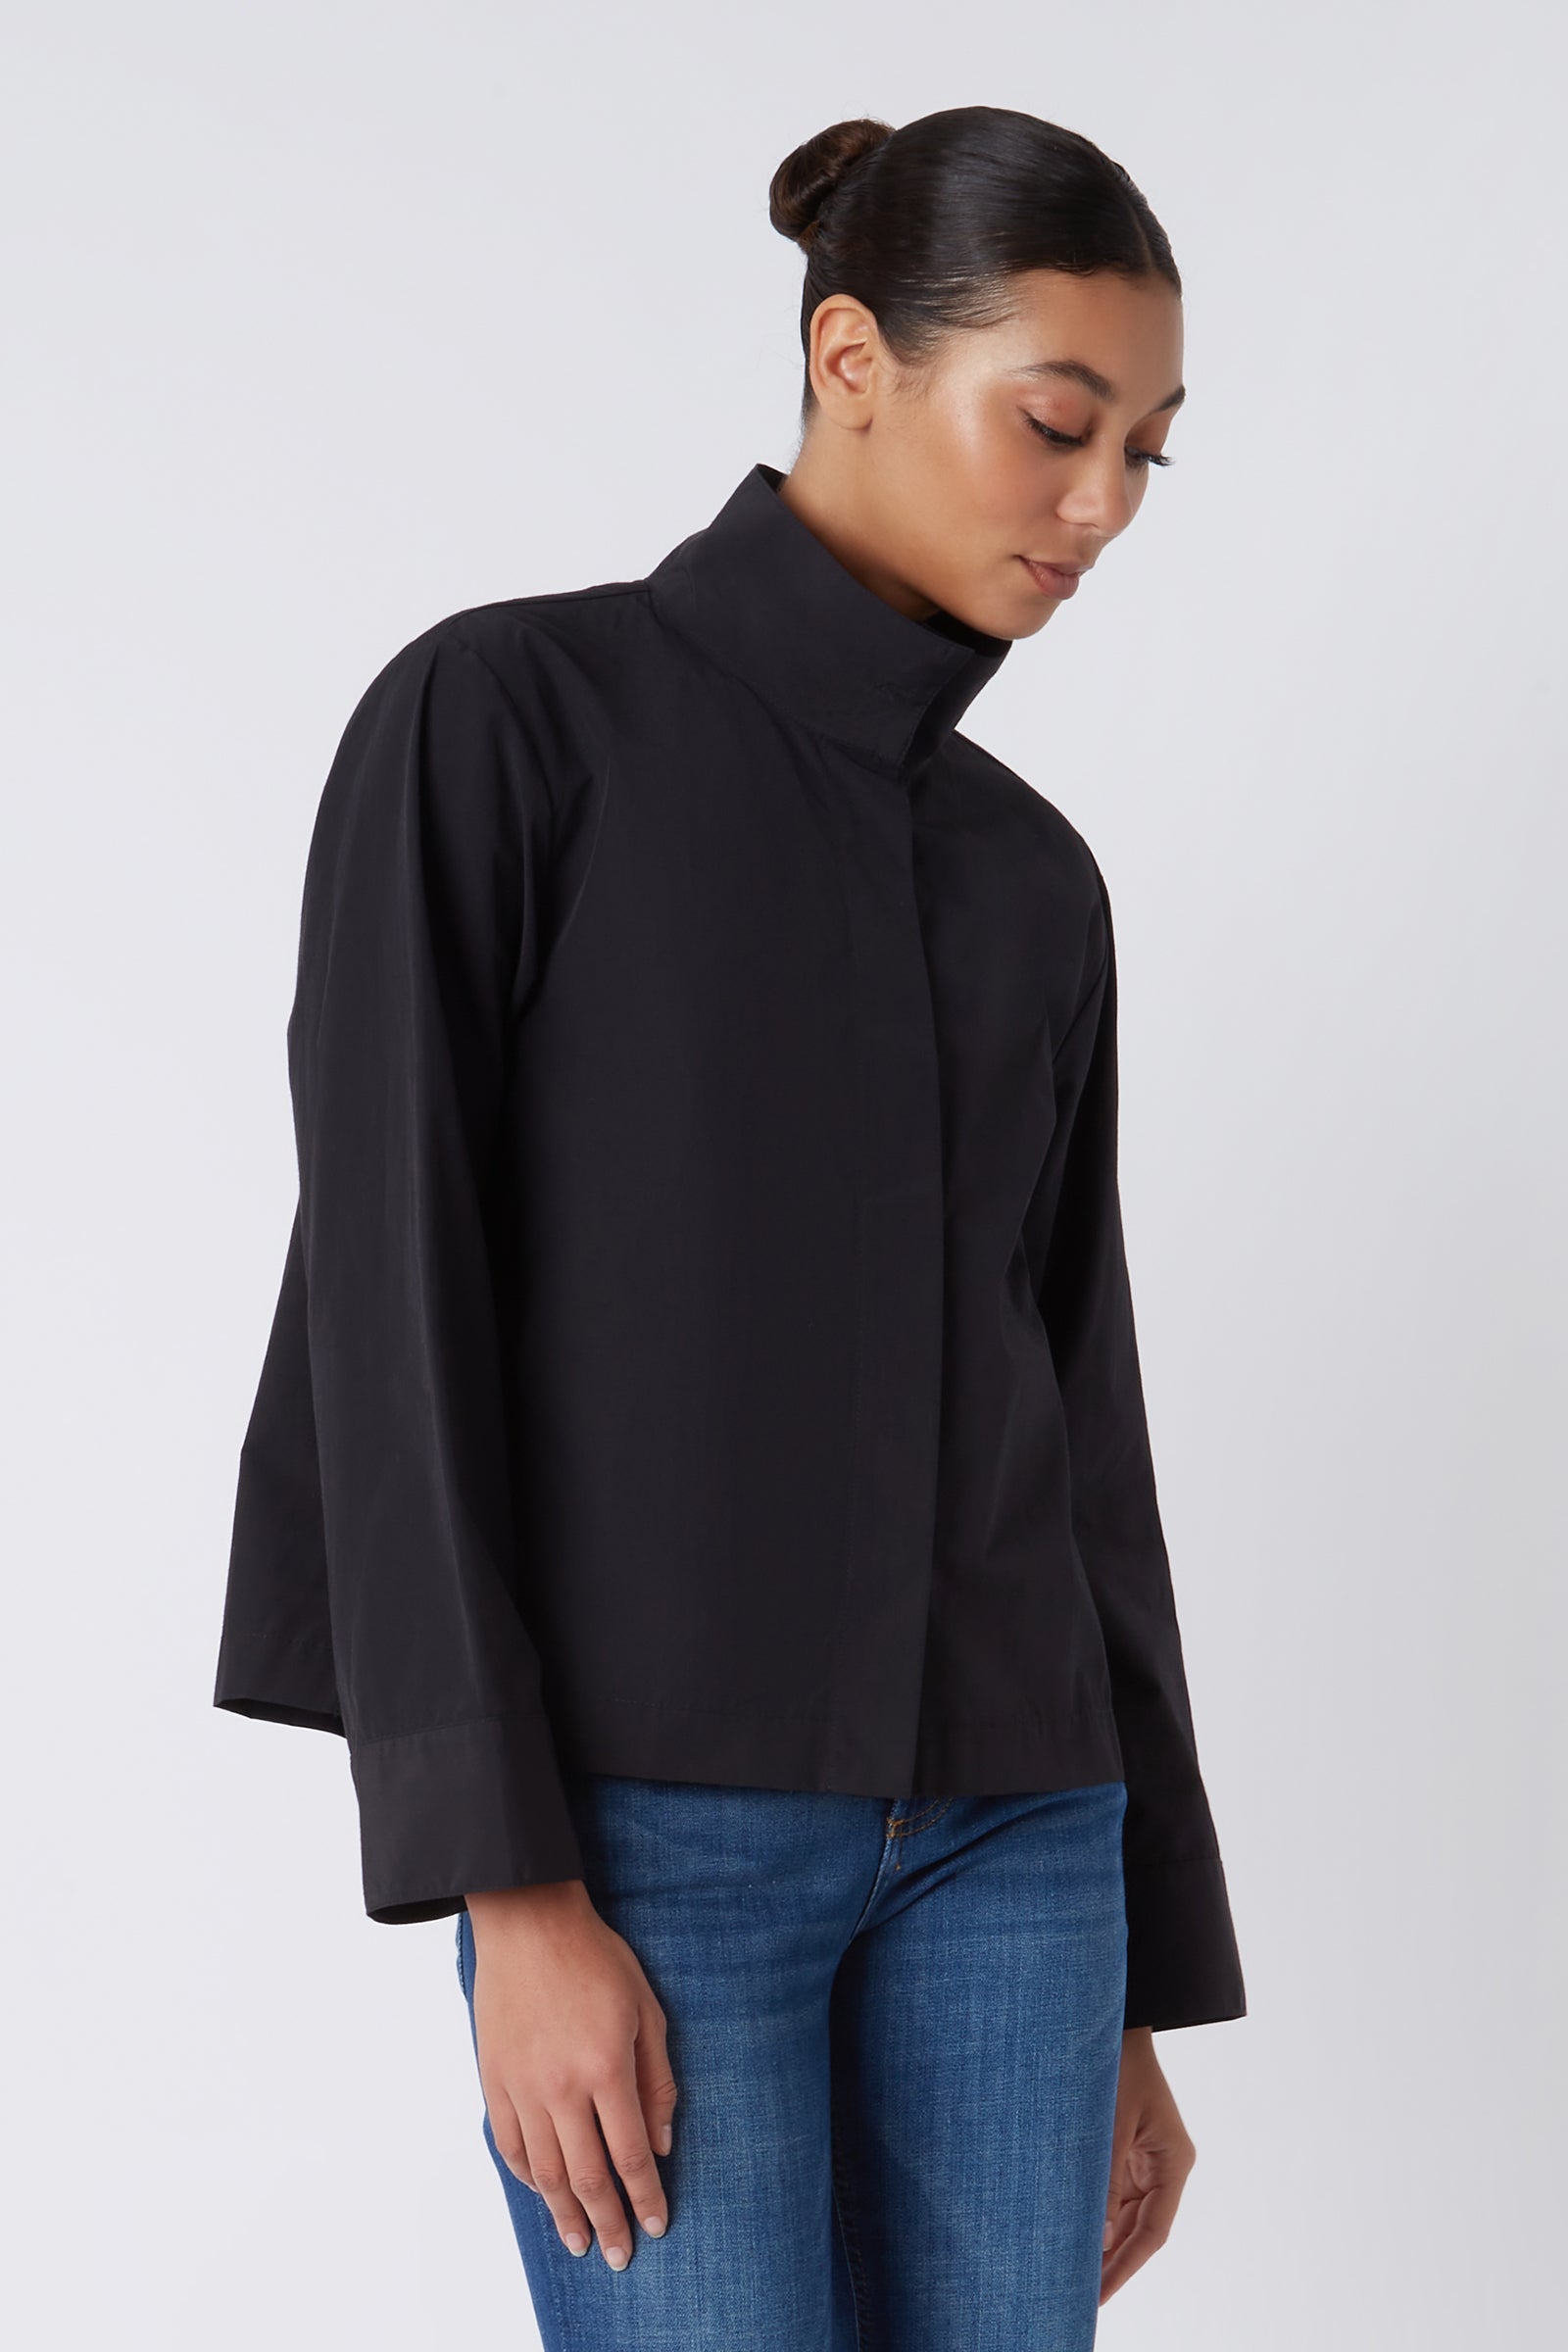 Kal Rieman Peggy Collared Shirt in Black on Model Looking Down Cropped Front View